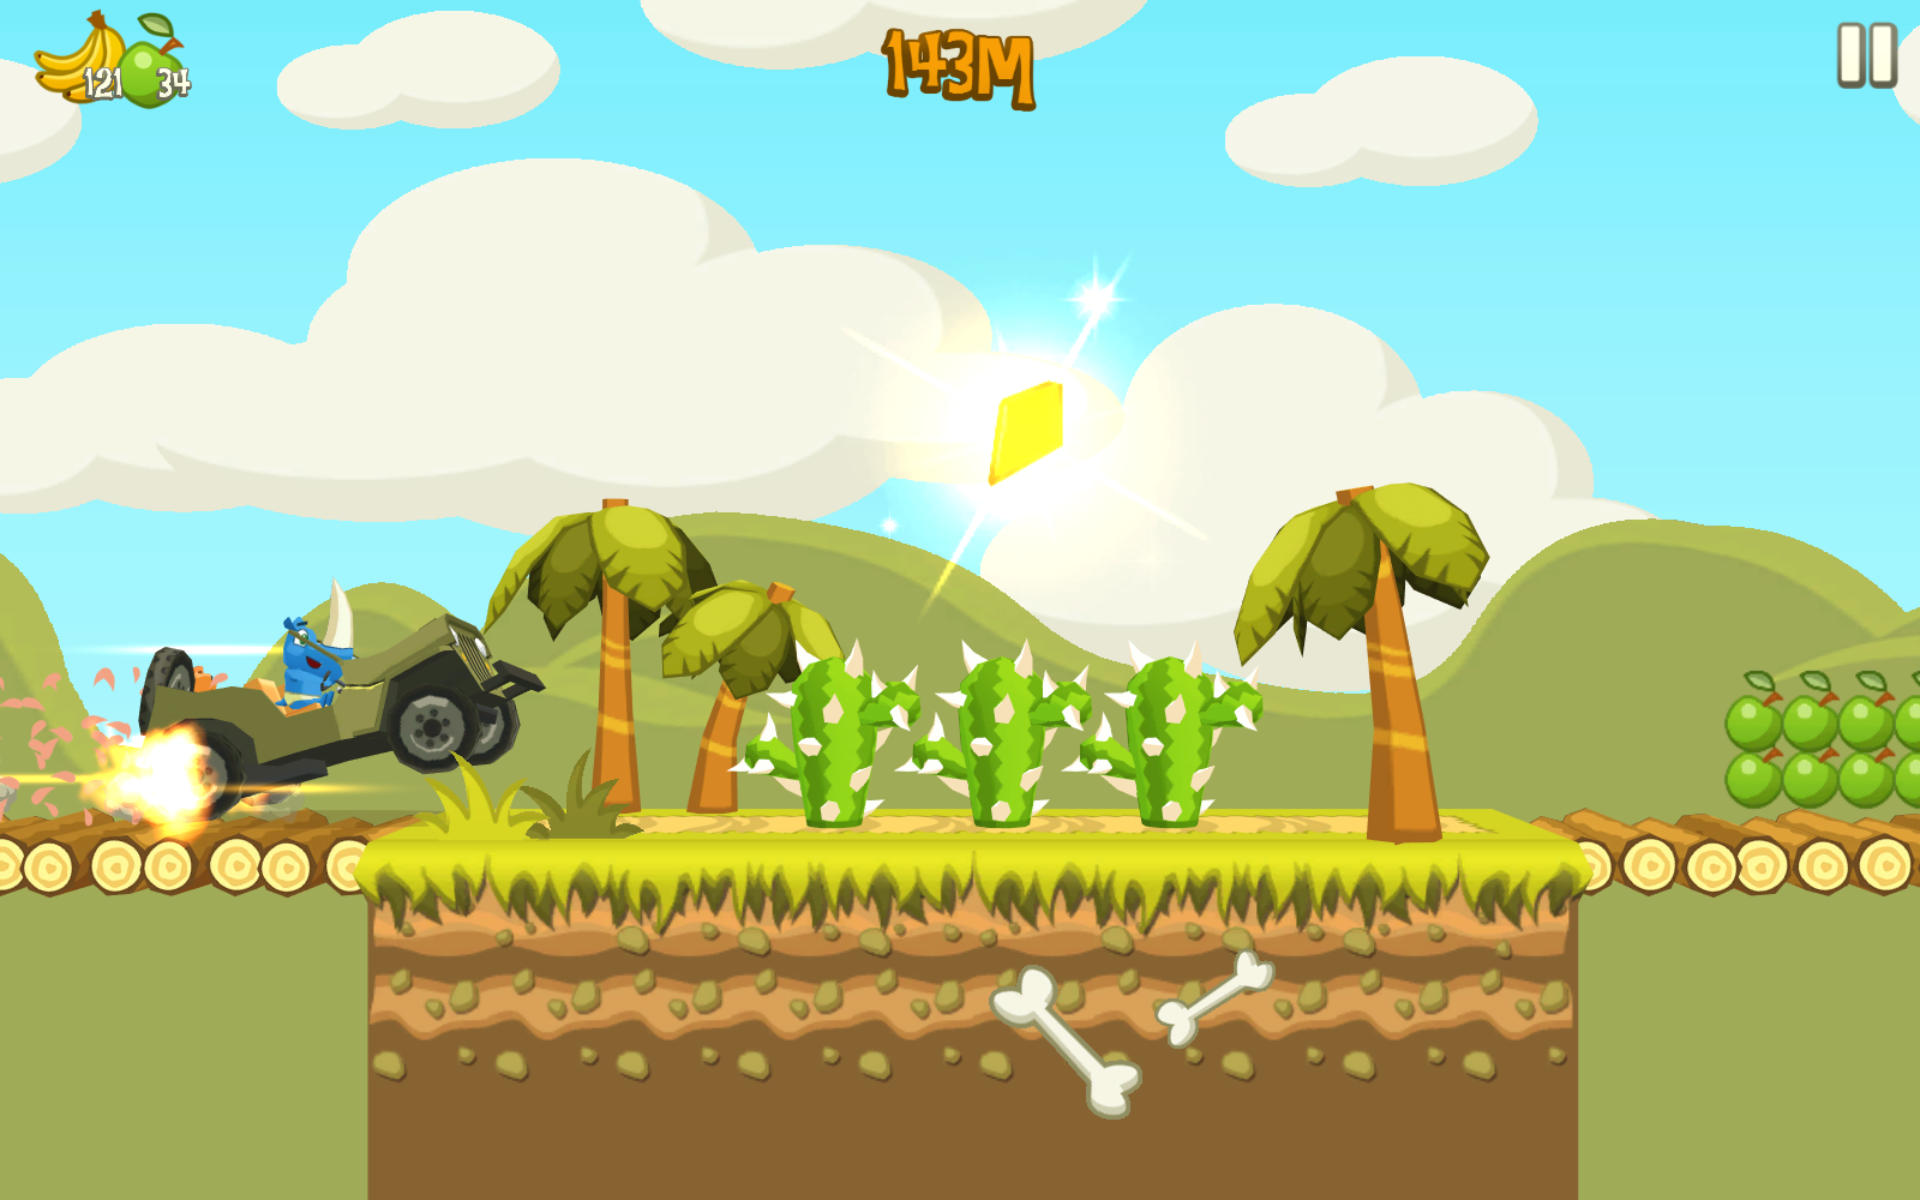 RHINO RUSH STAMPEDE - Play Online for Free!